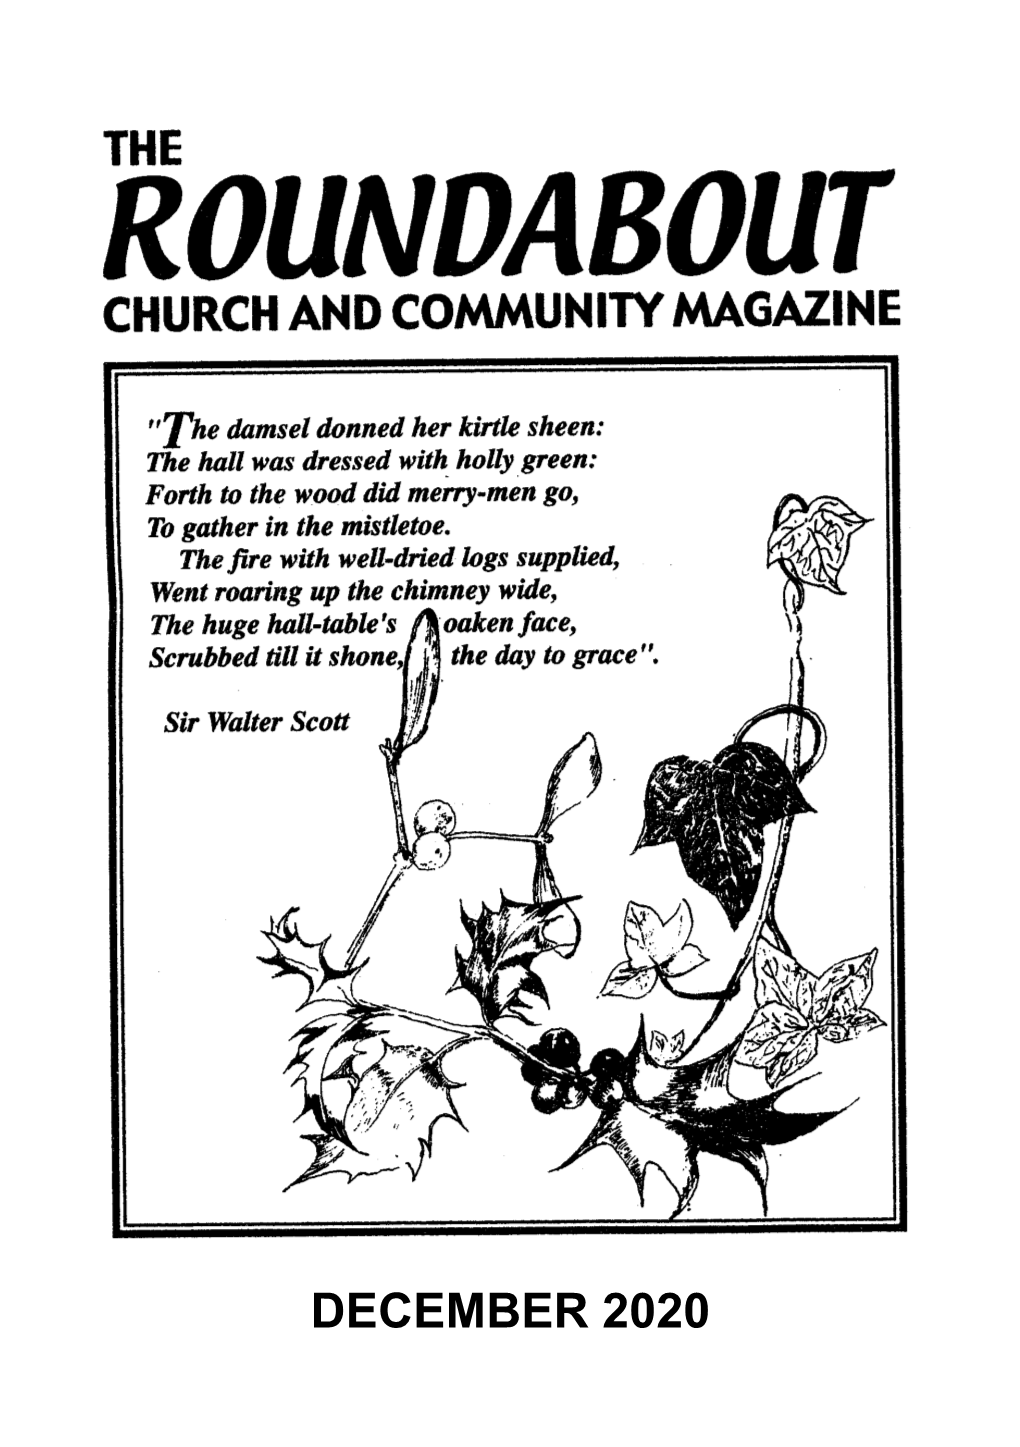 ROUNDABOUT Roundabout Email Address: Magazine@Roundaboutnews.Org.Uk All Material in Word, Please, and Not in Boxes